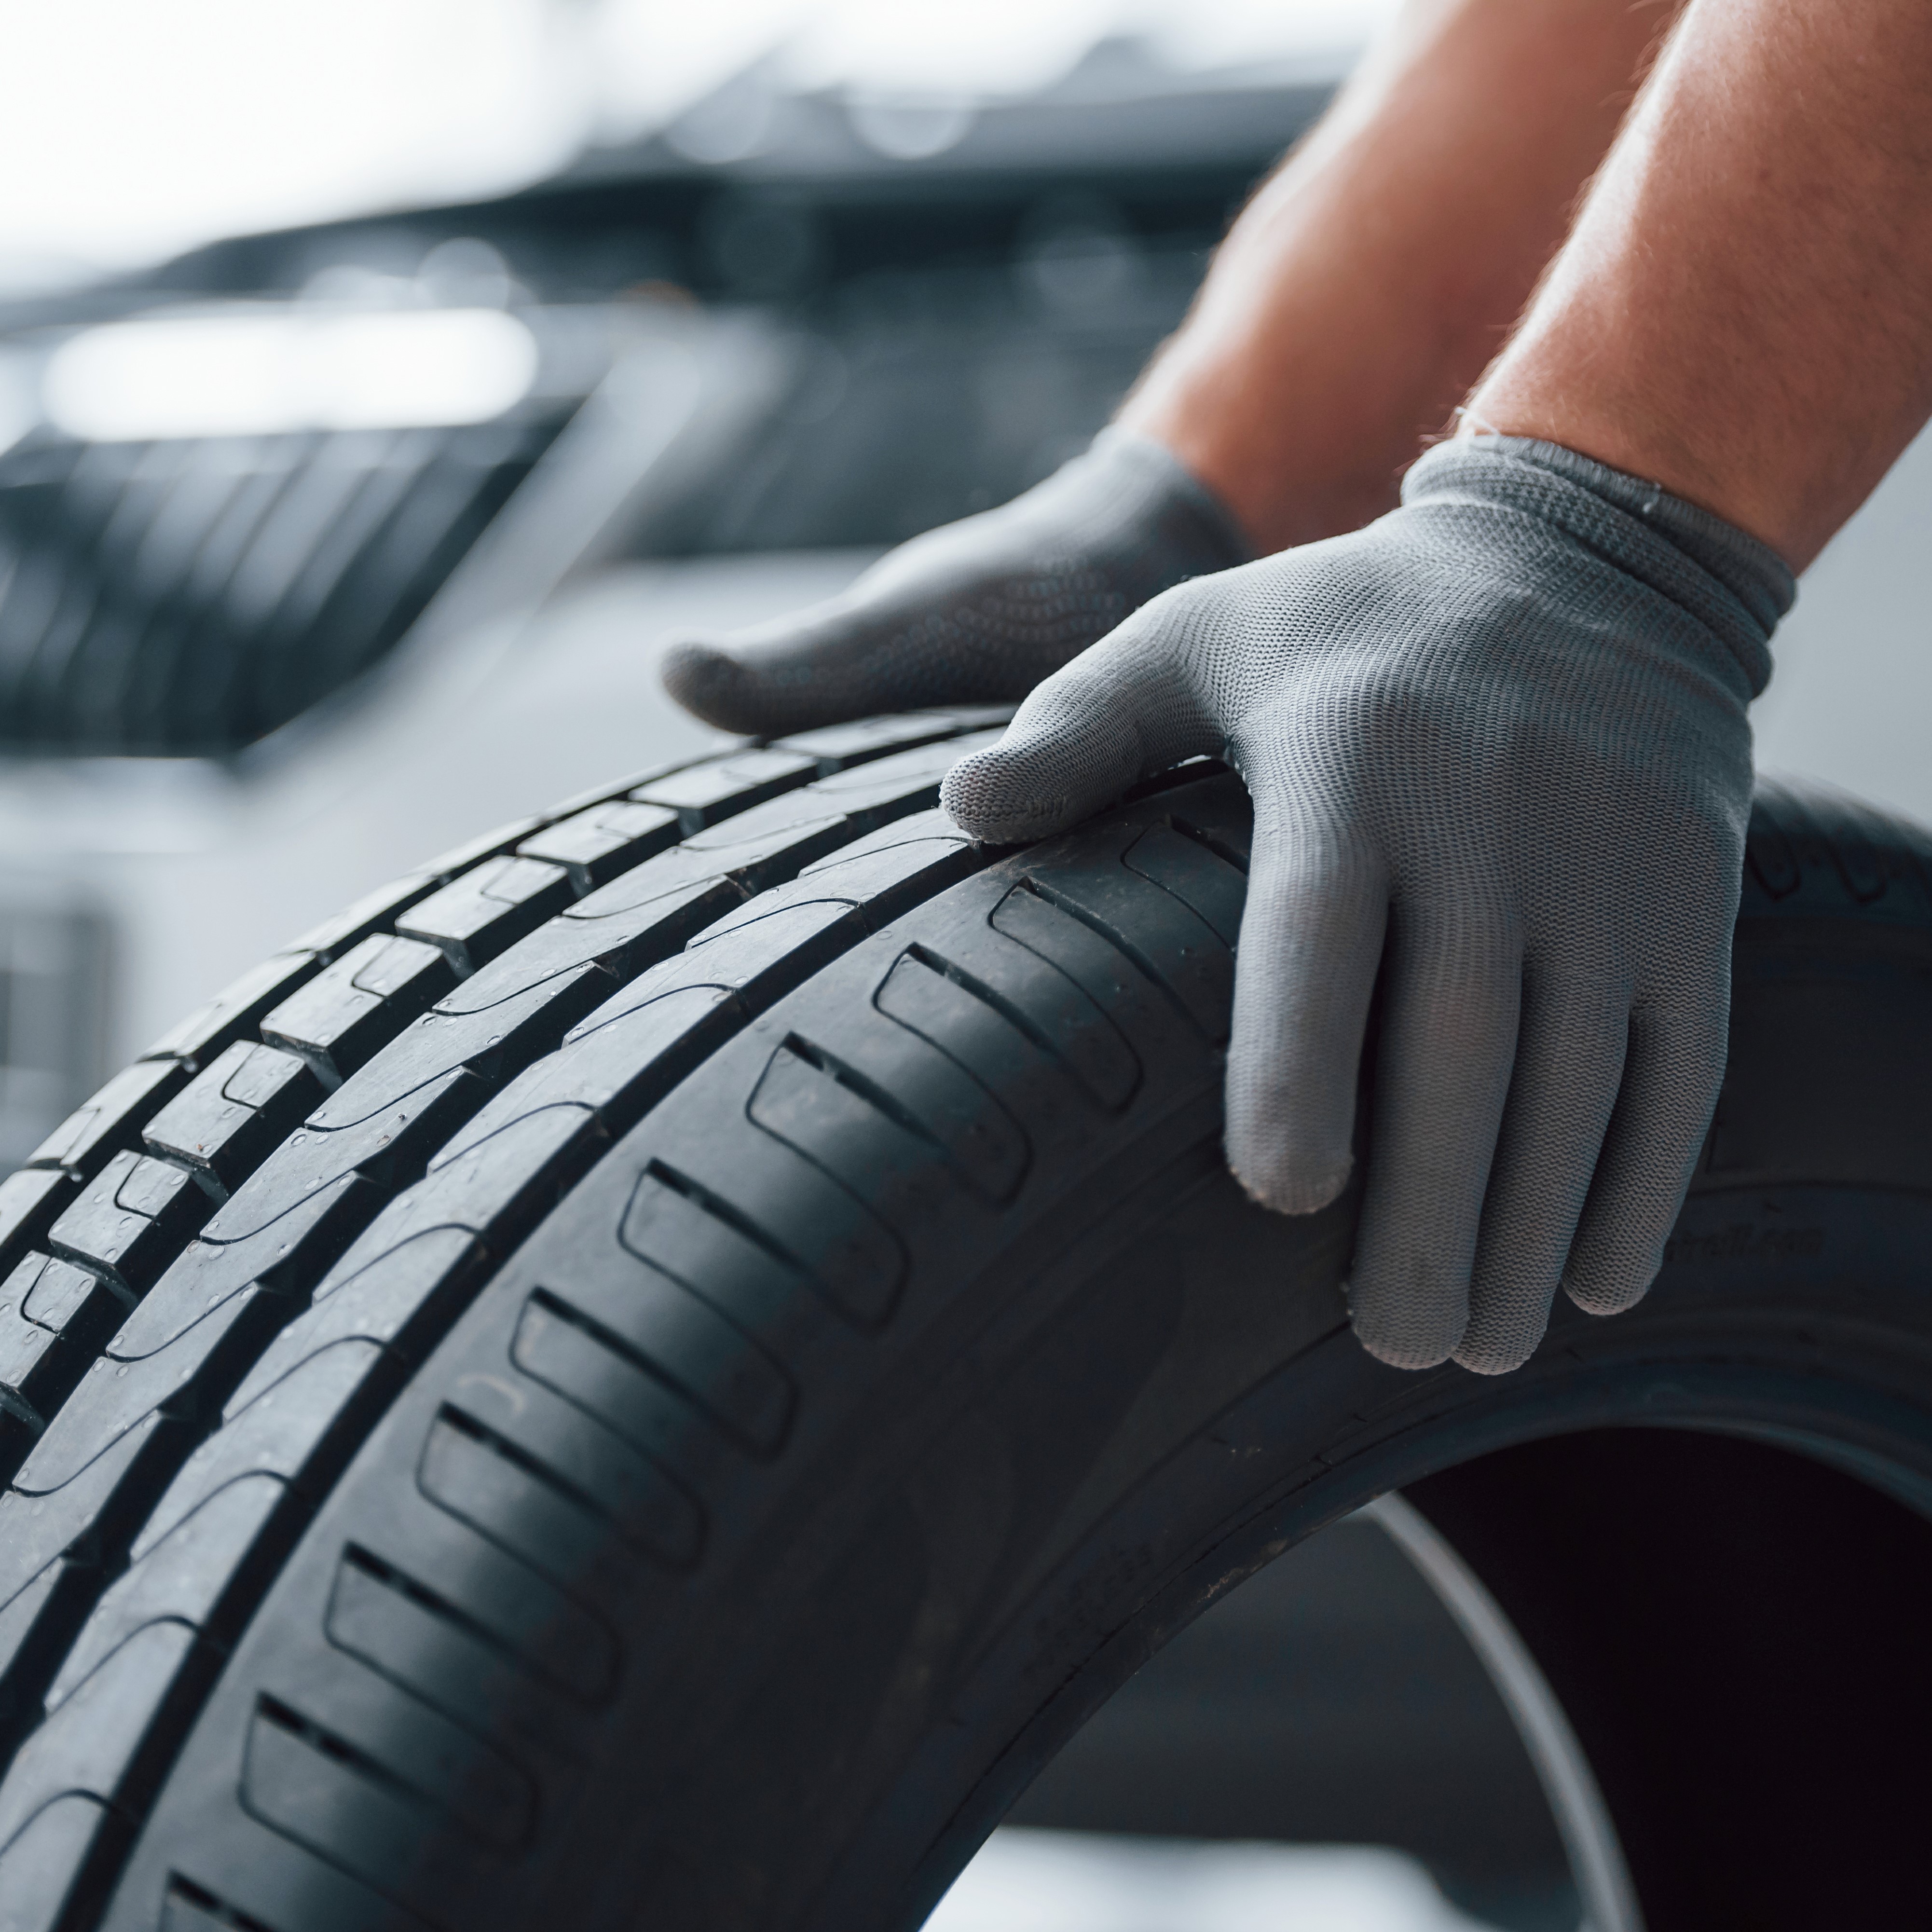 AAA Advises Motorists to Make Tire Maintenance a Priority Before Summer Road Trips